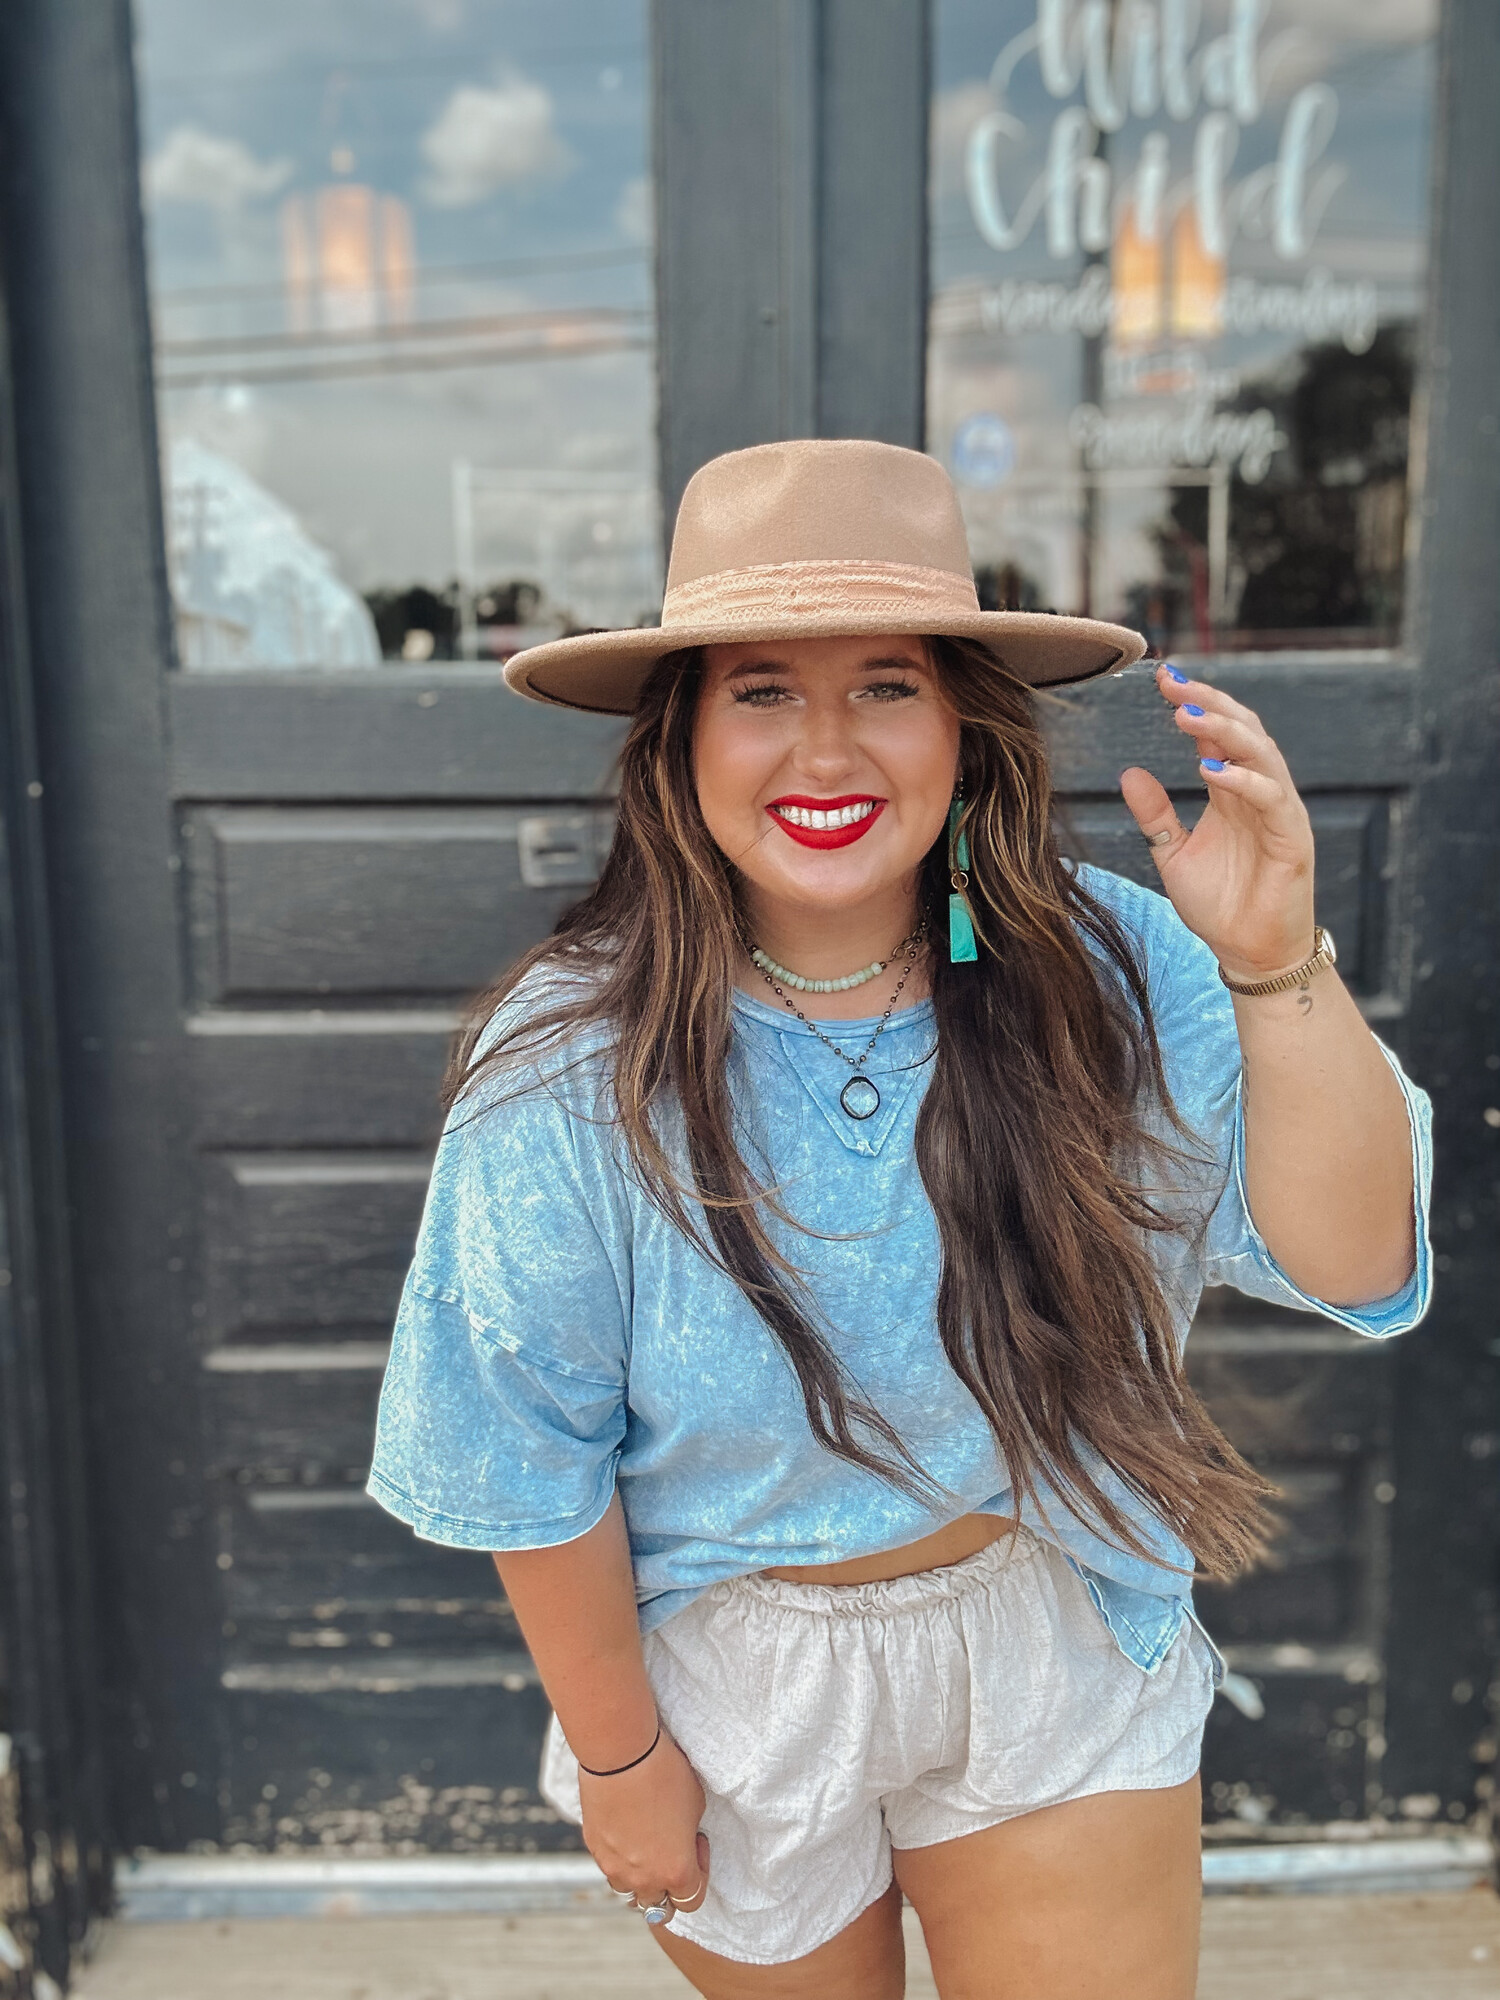 These mineral wash tops are perfect for layering in the winter or sporting on its own in the summer with shorts!

Available in sizes 1x,2x,3x. Colors: Pink, Red, Sky Blue, and Mocha.

Madison is wearing a size 2x.